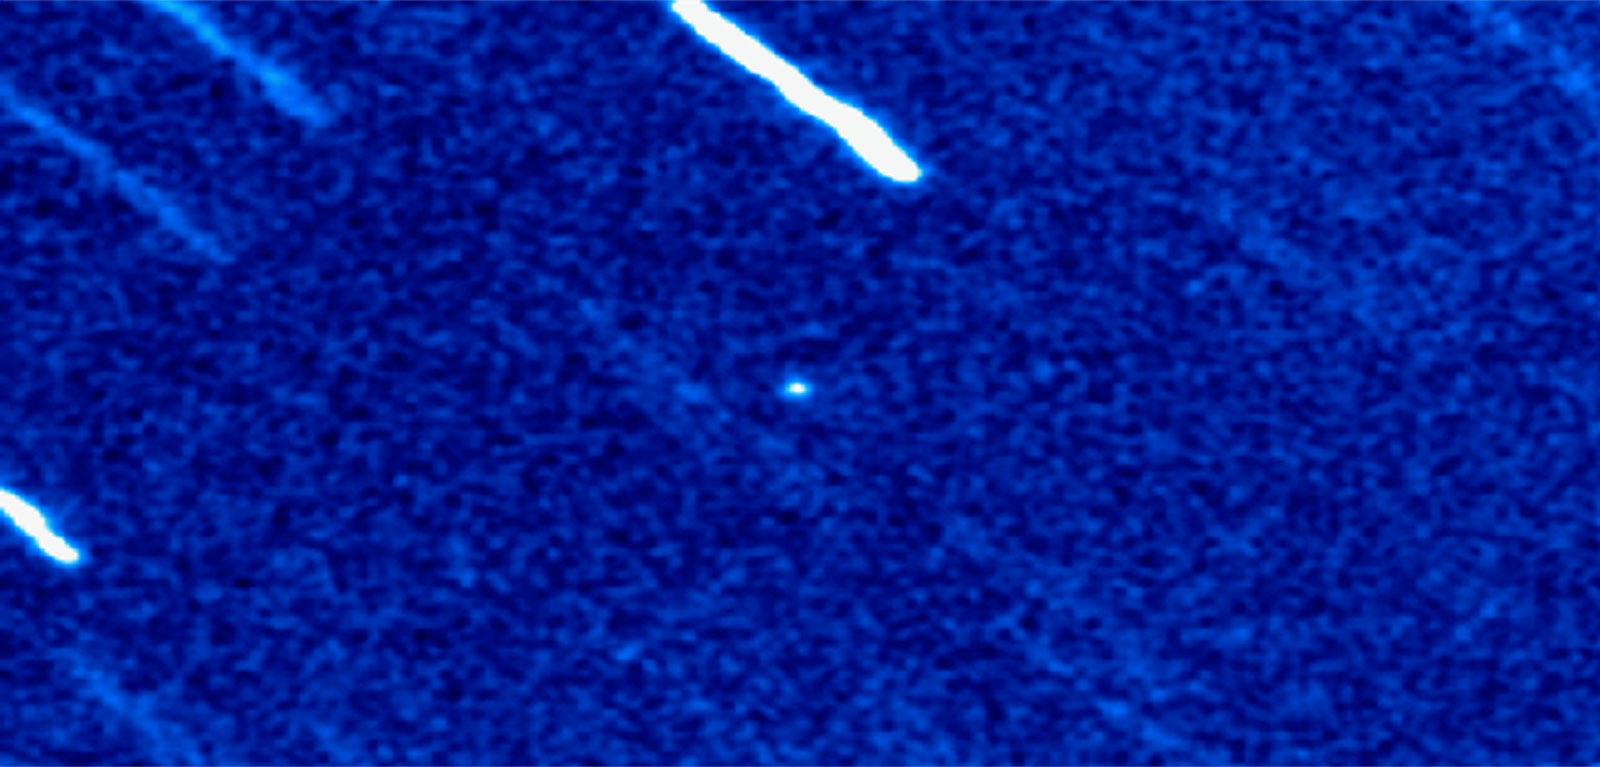 first visiting object from outside our solar system